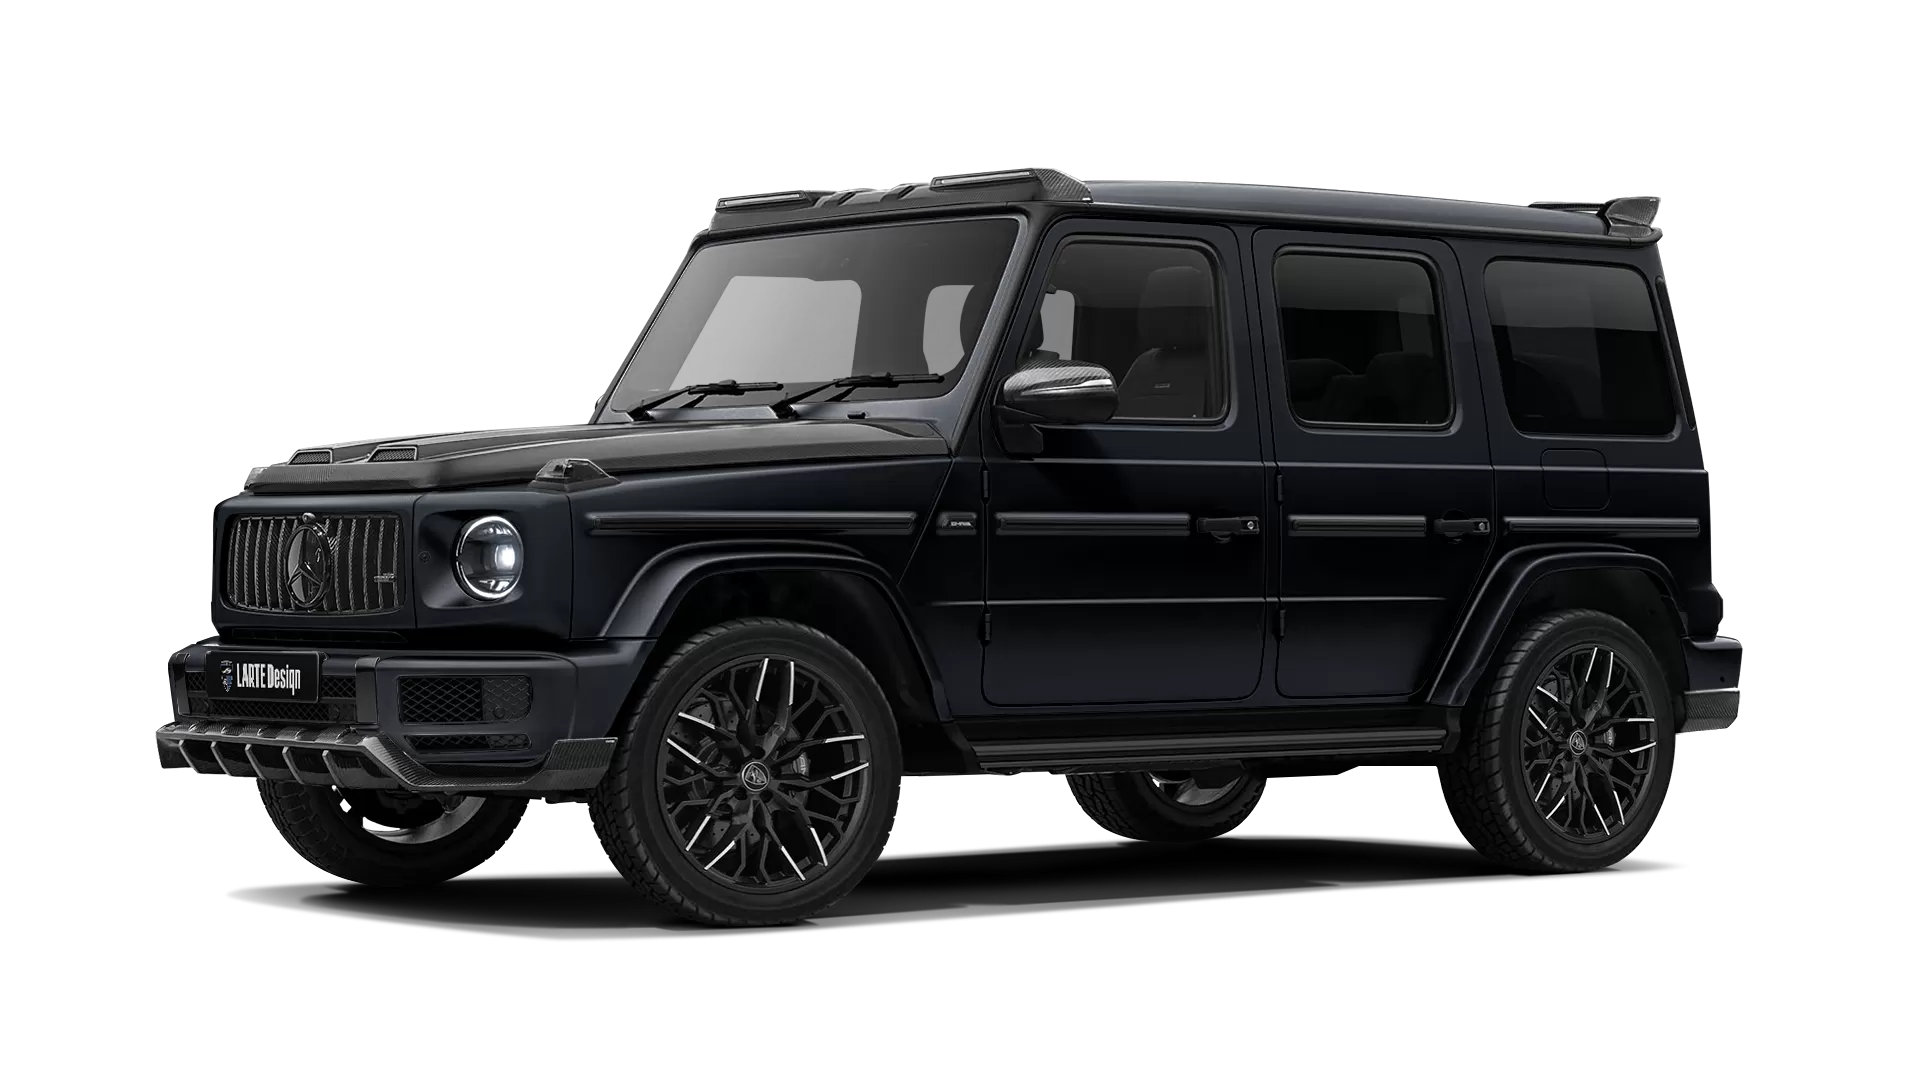 Mercedes G class W463 with carbon body kit: front view shown in Night Black